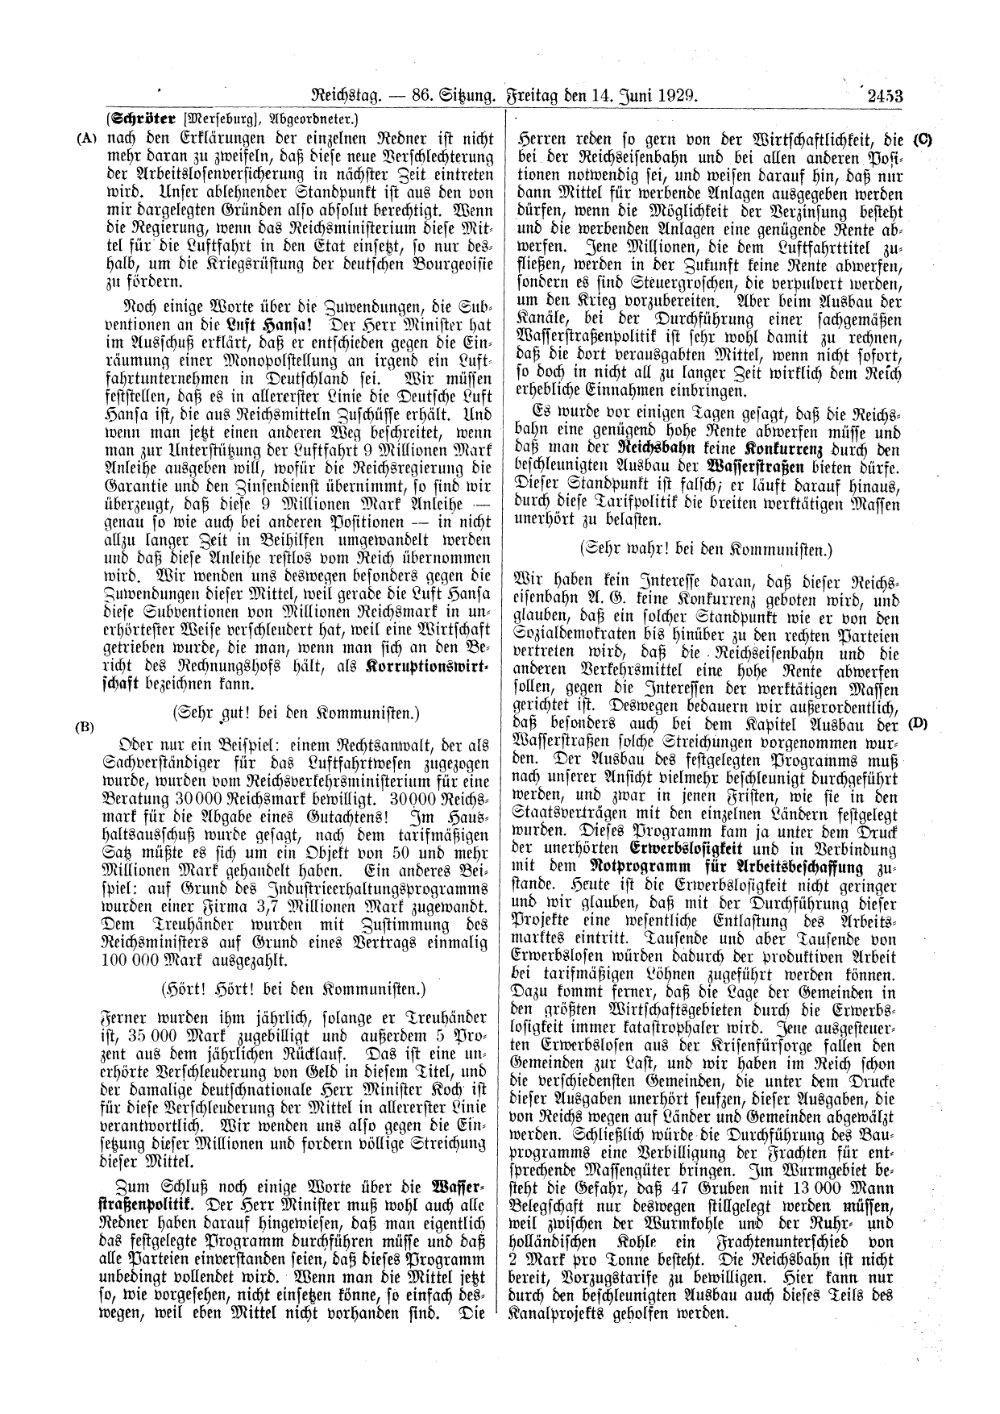 Scan of page 2453